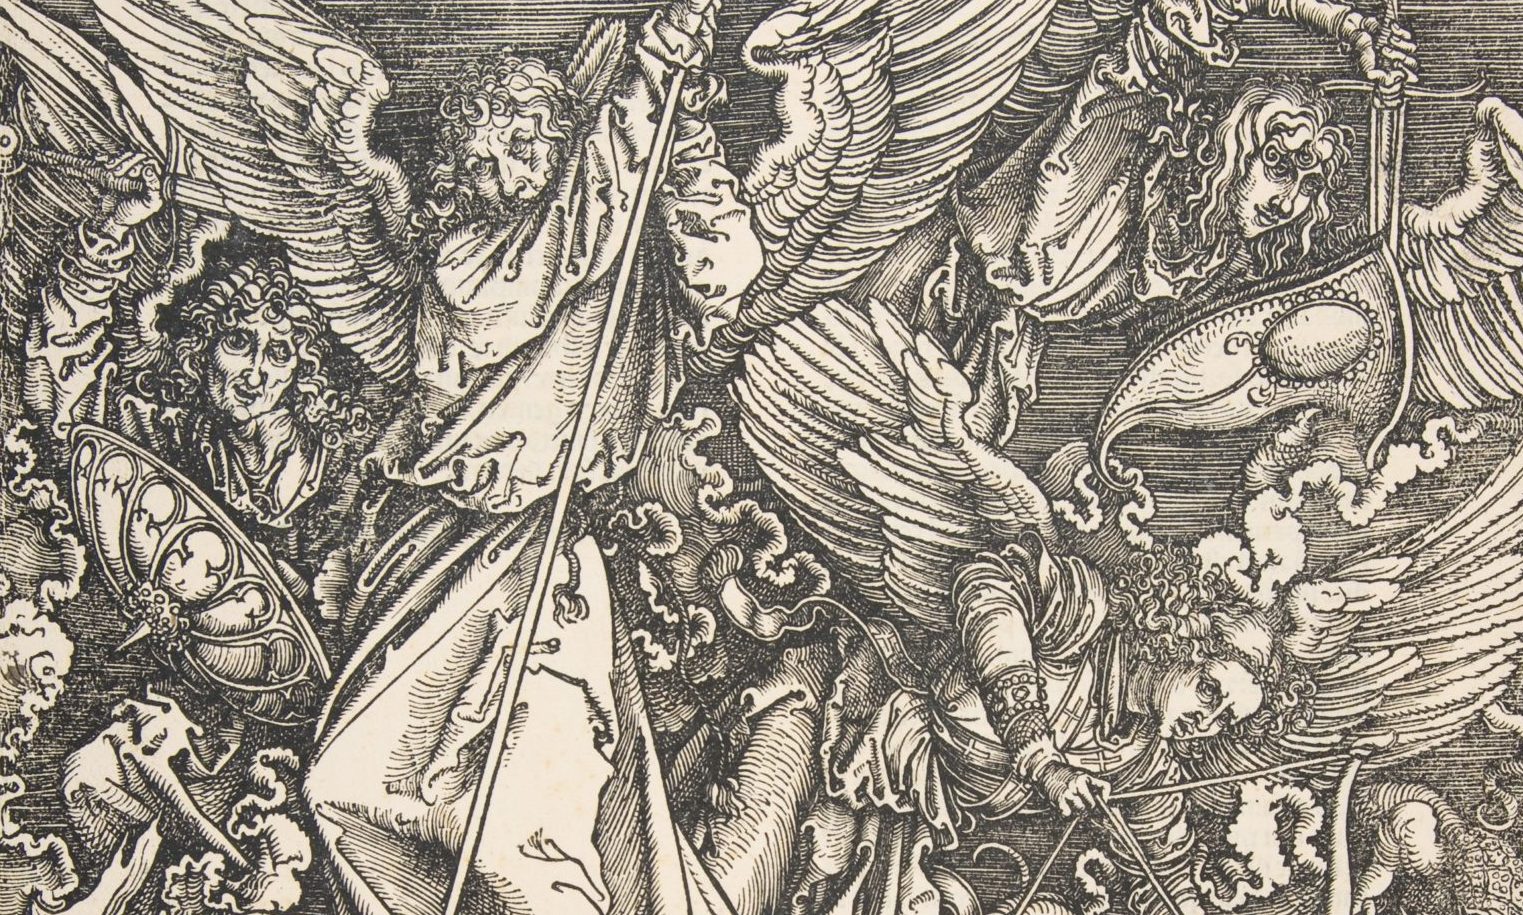 Saint Michael Fighting the Dragon, from The Apocalypse, a woodcut by Albrecht Durer